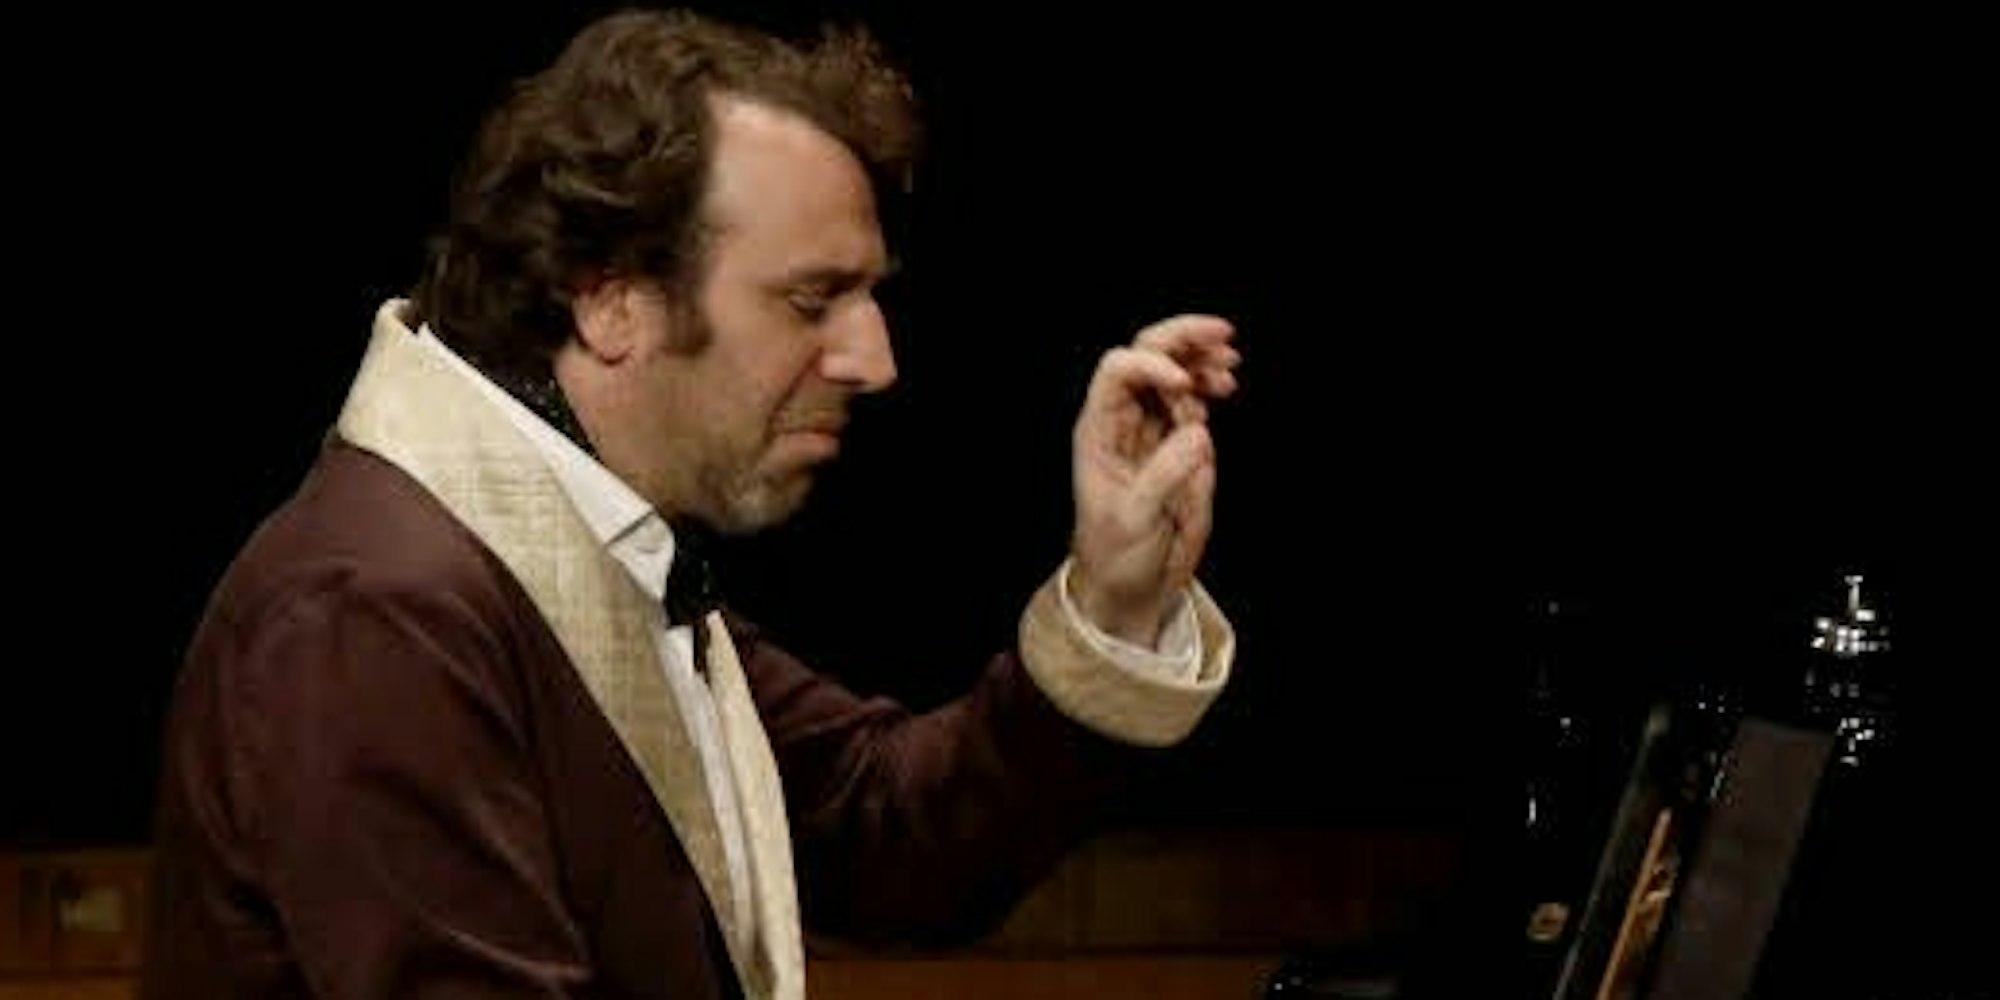 Spaß im Morgenmantel: Chilly Gonzales in Aktion